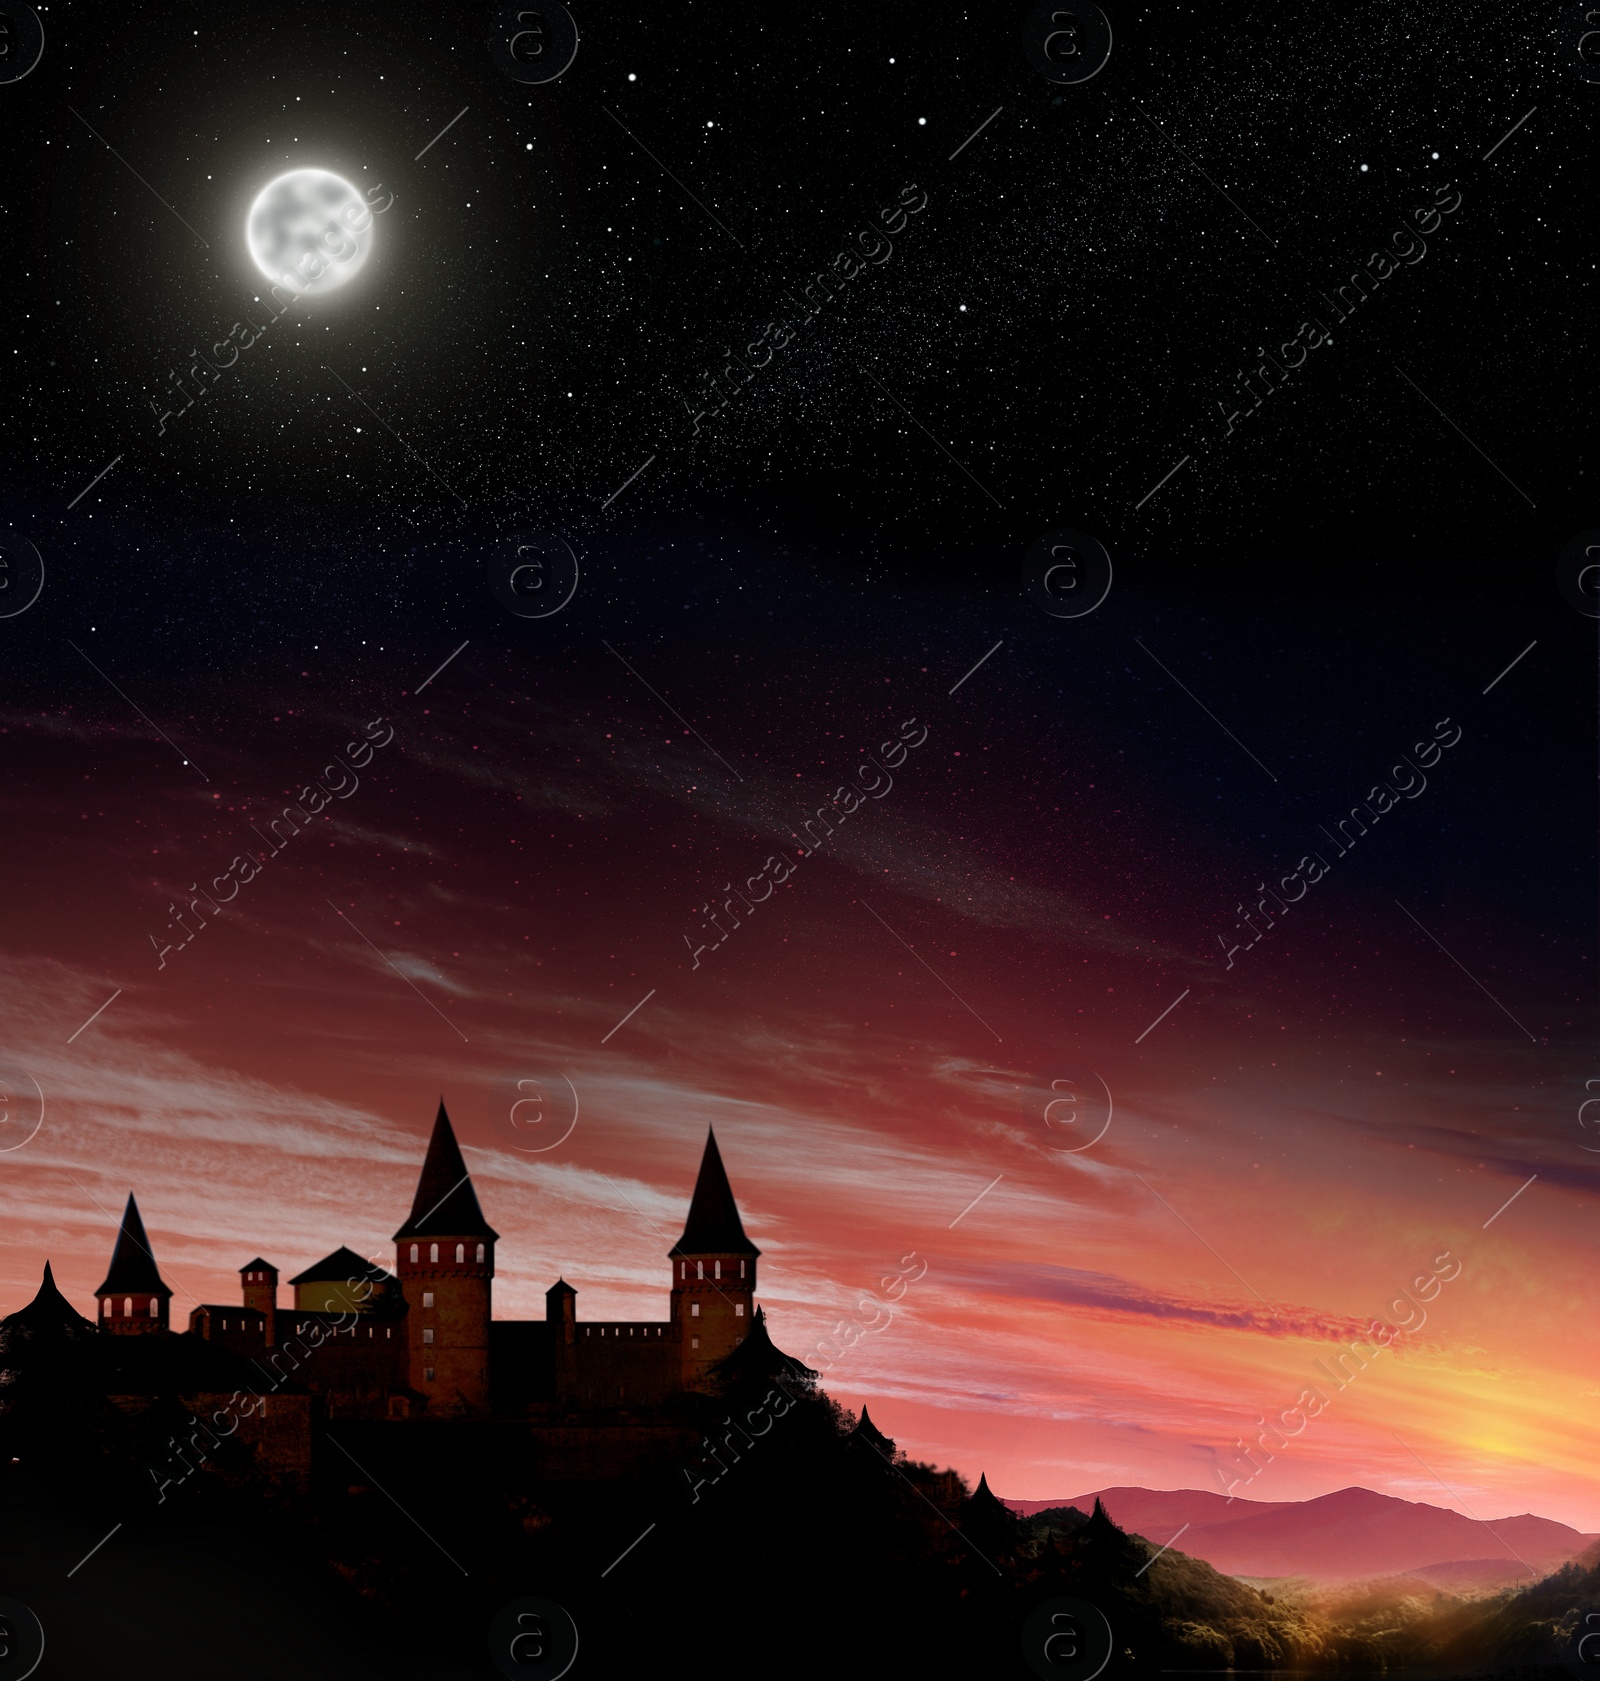 Image of Fairy tale world. Magnificent castle under starry sky with full moon 